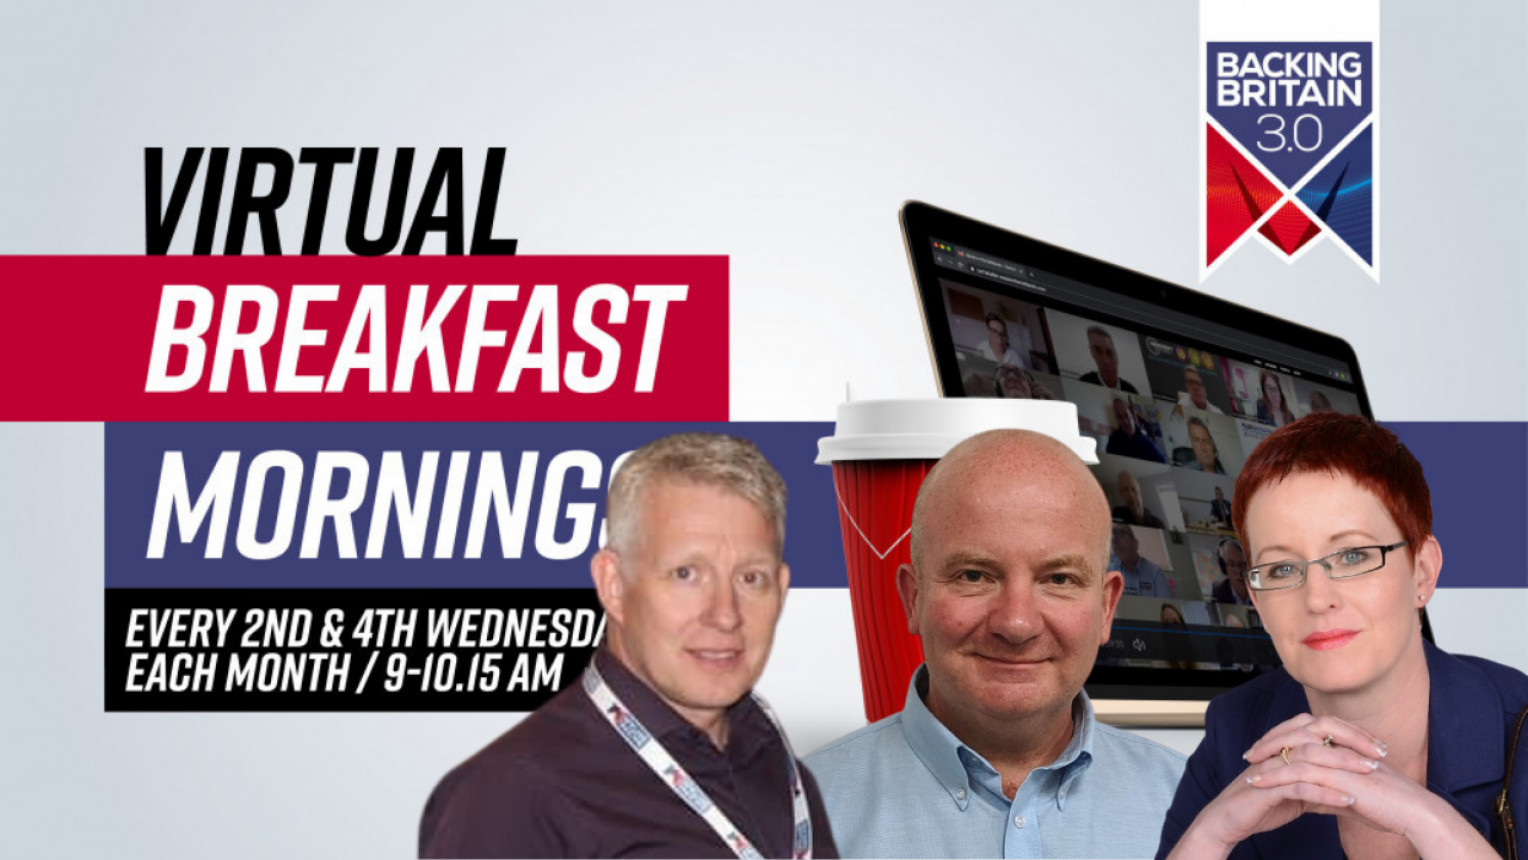 Backing Britain Virtual Breakfast Mornings with Central Scanning, Professional Polishing Services and Global Precision